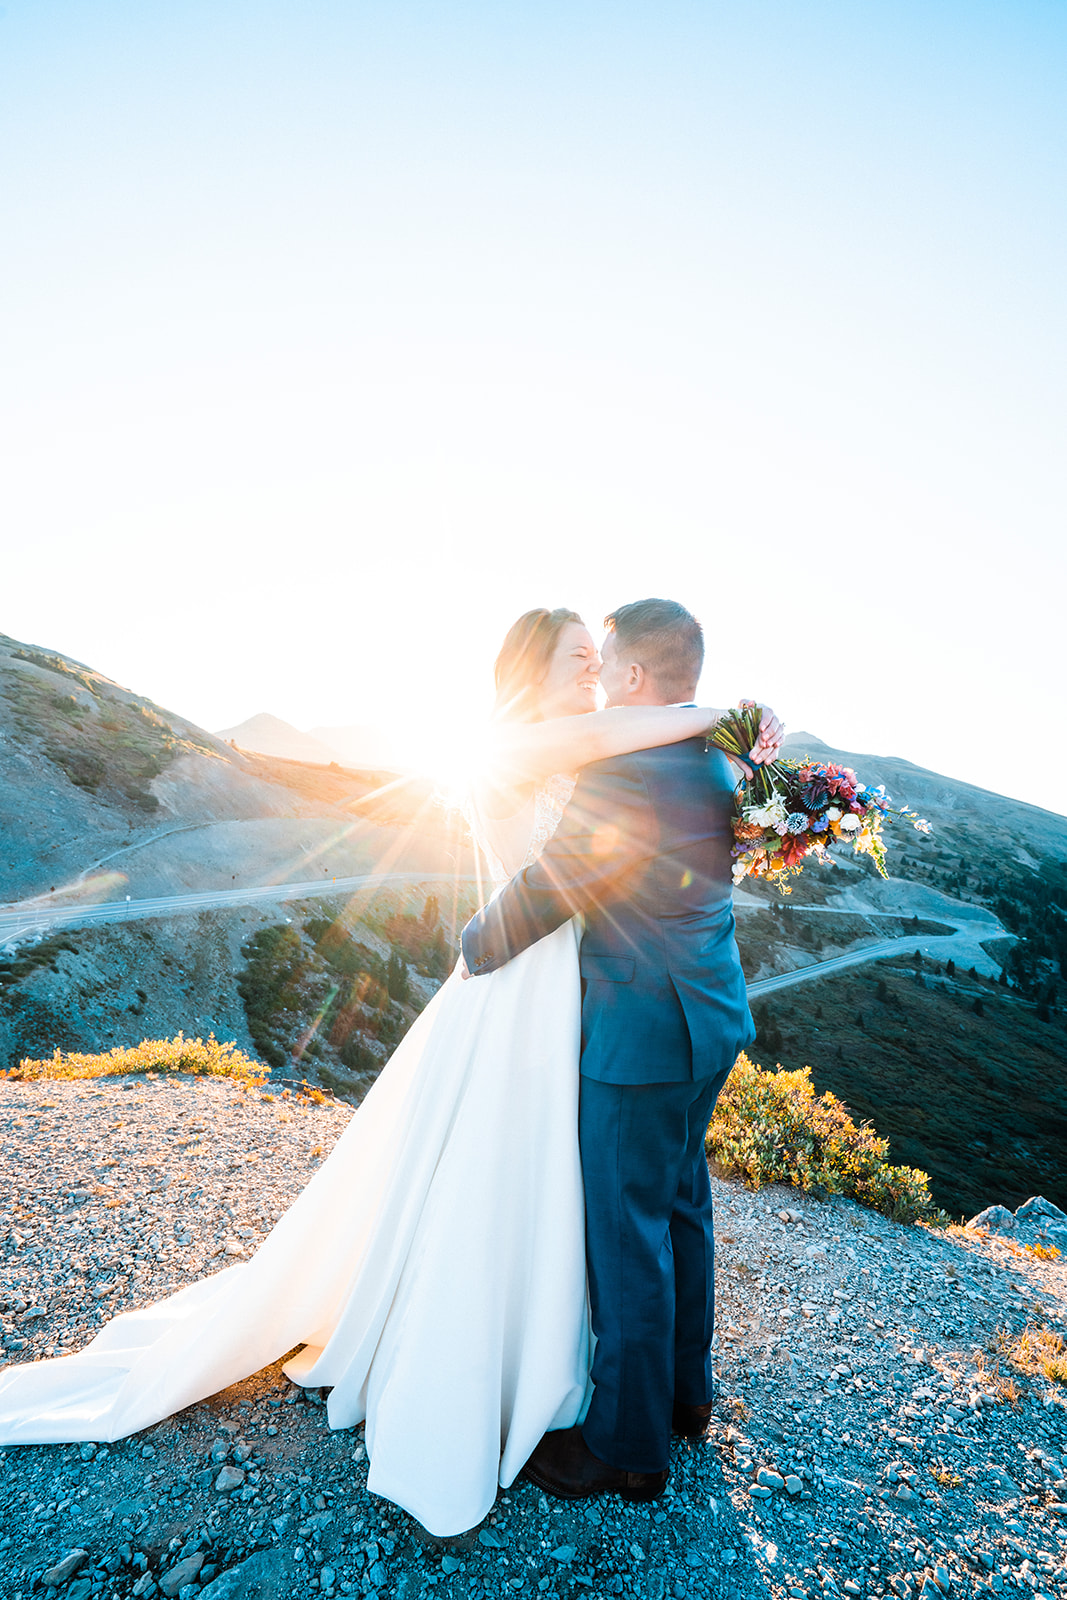 Bride and groom holding one another during sunset